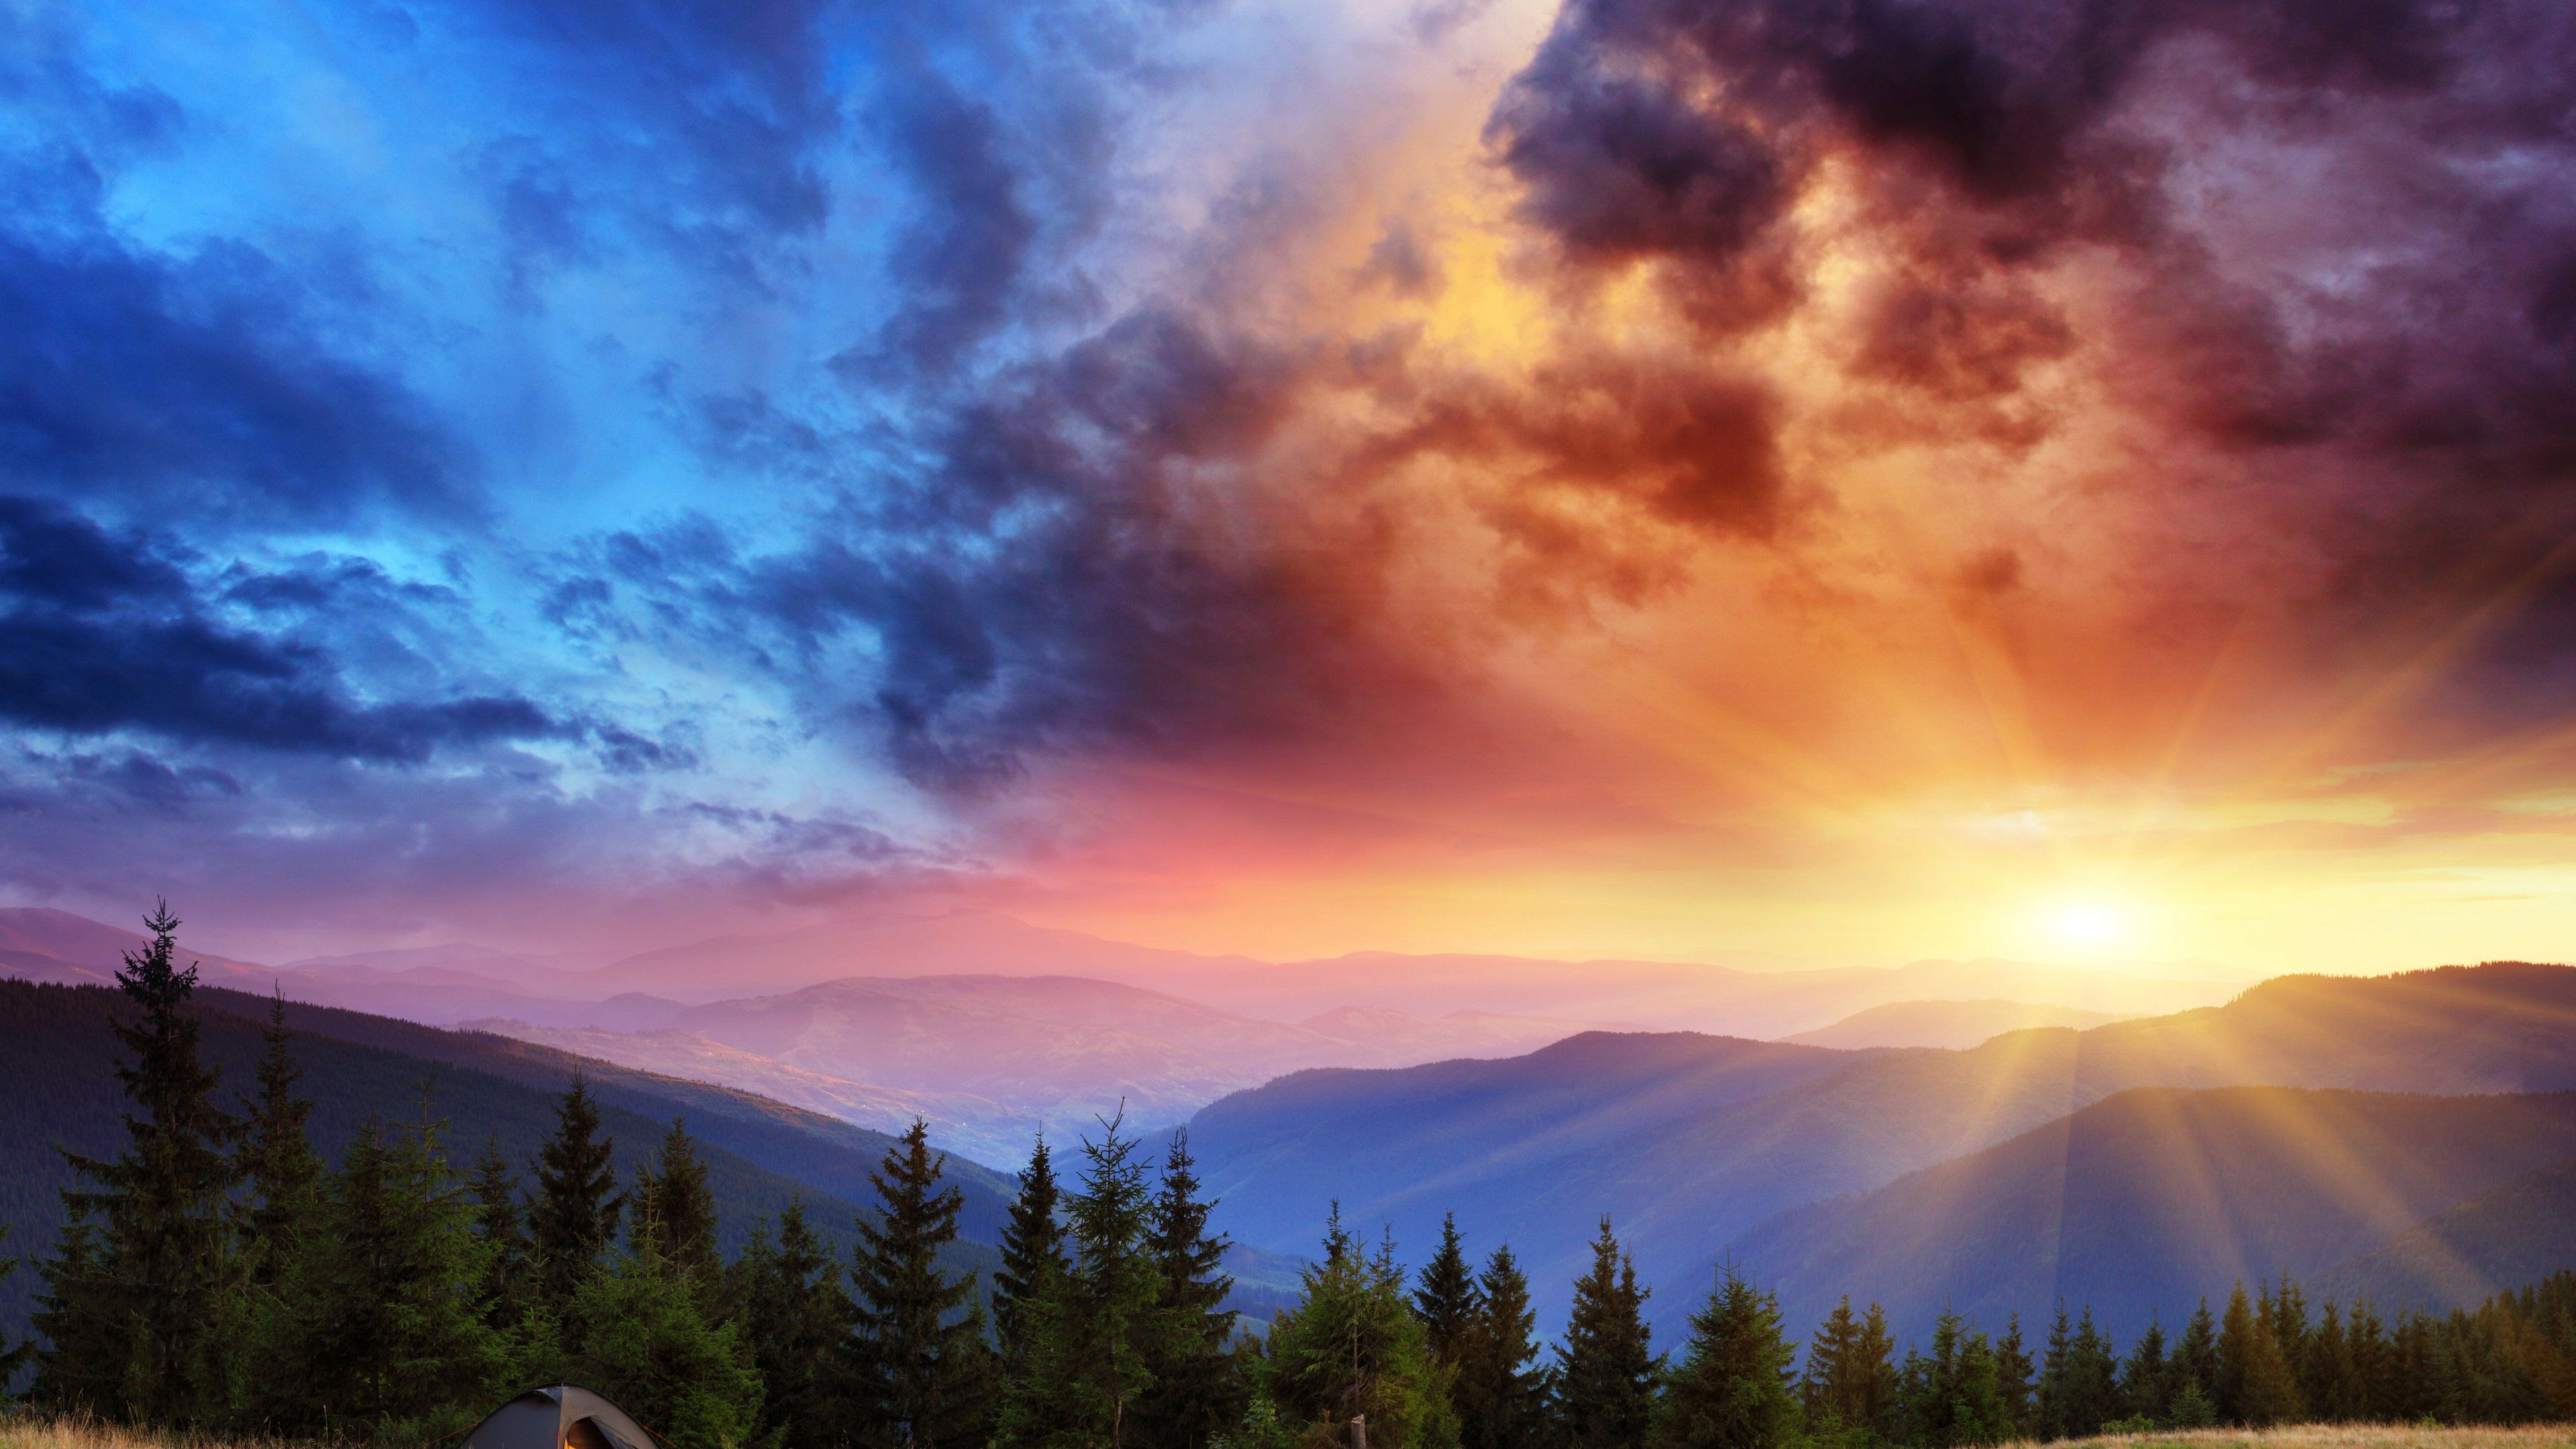 385 Sunrise HD Wallpapers | Backgrounds - Wallpaper Abyss